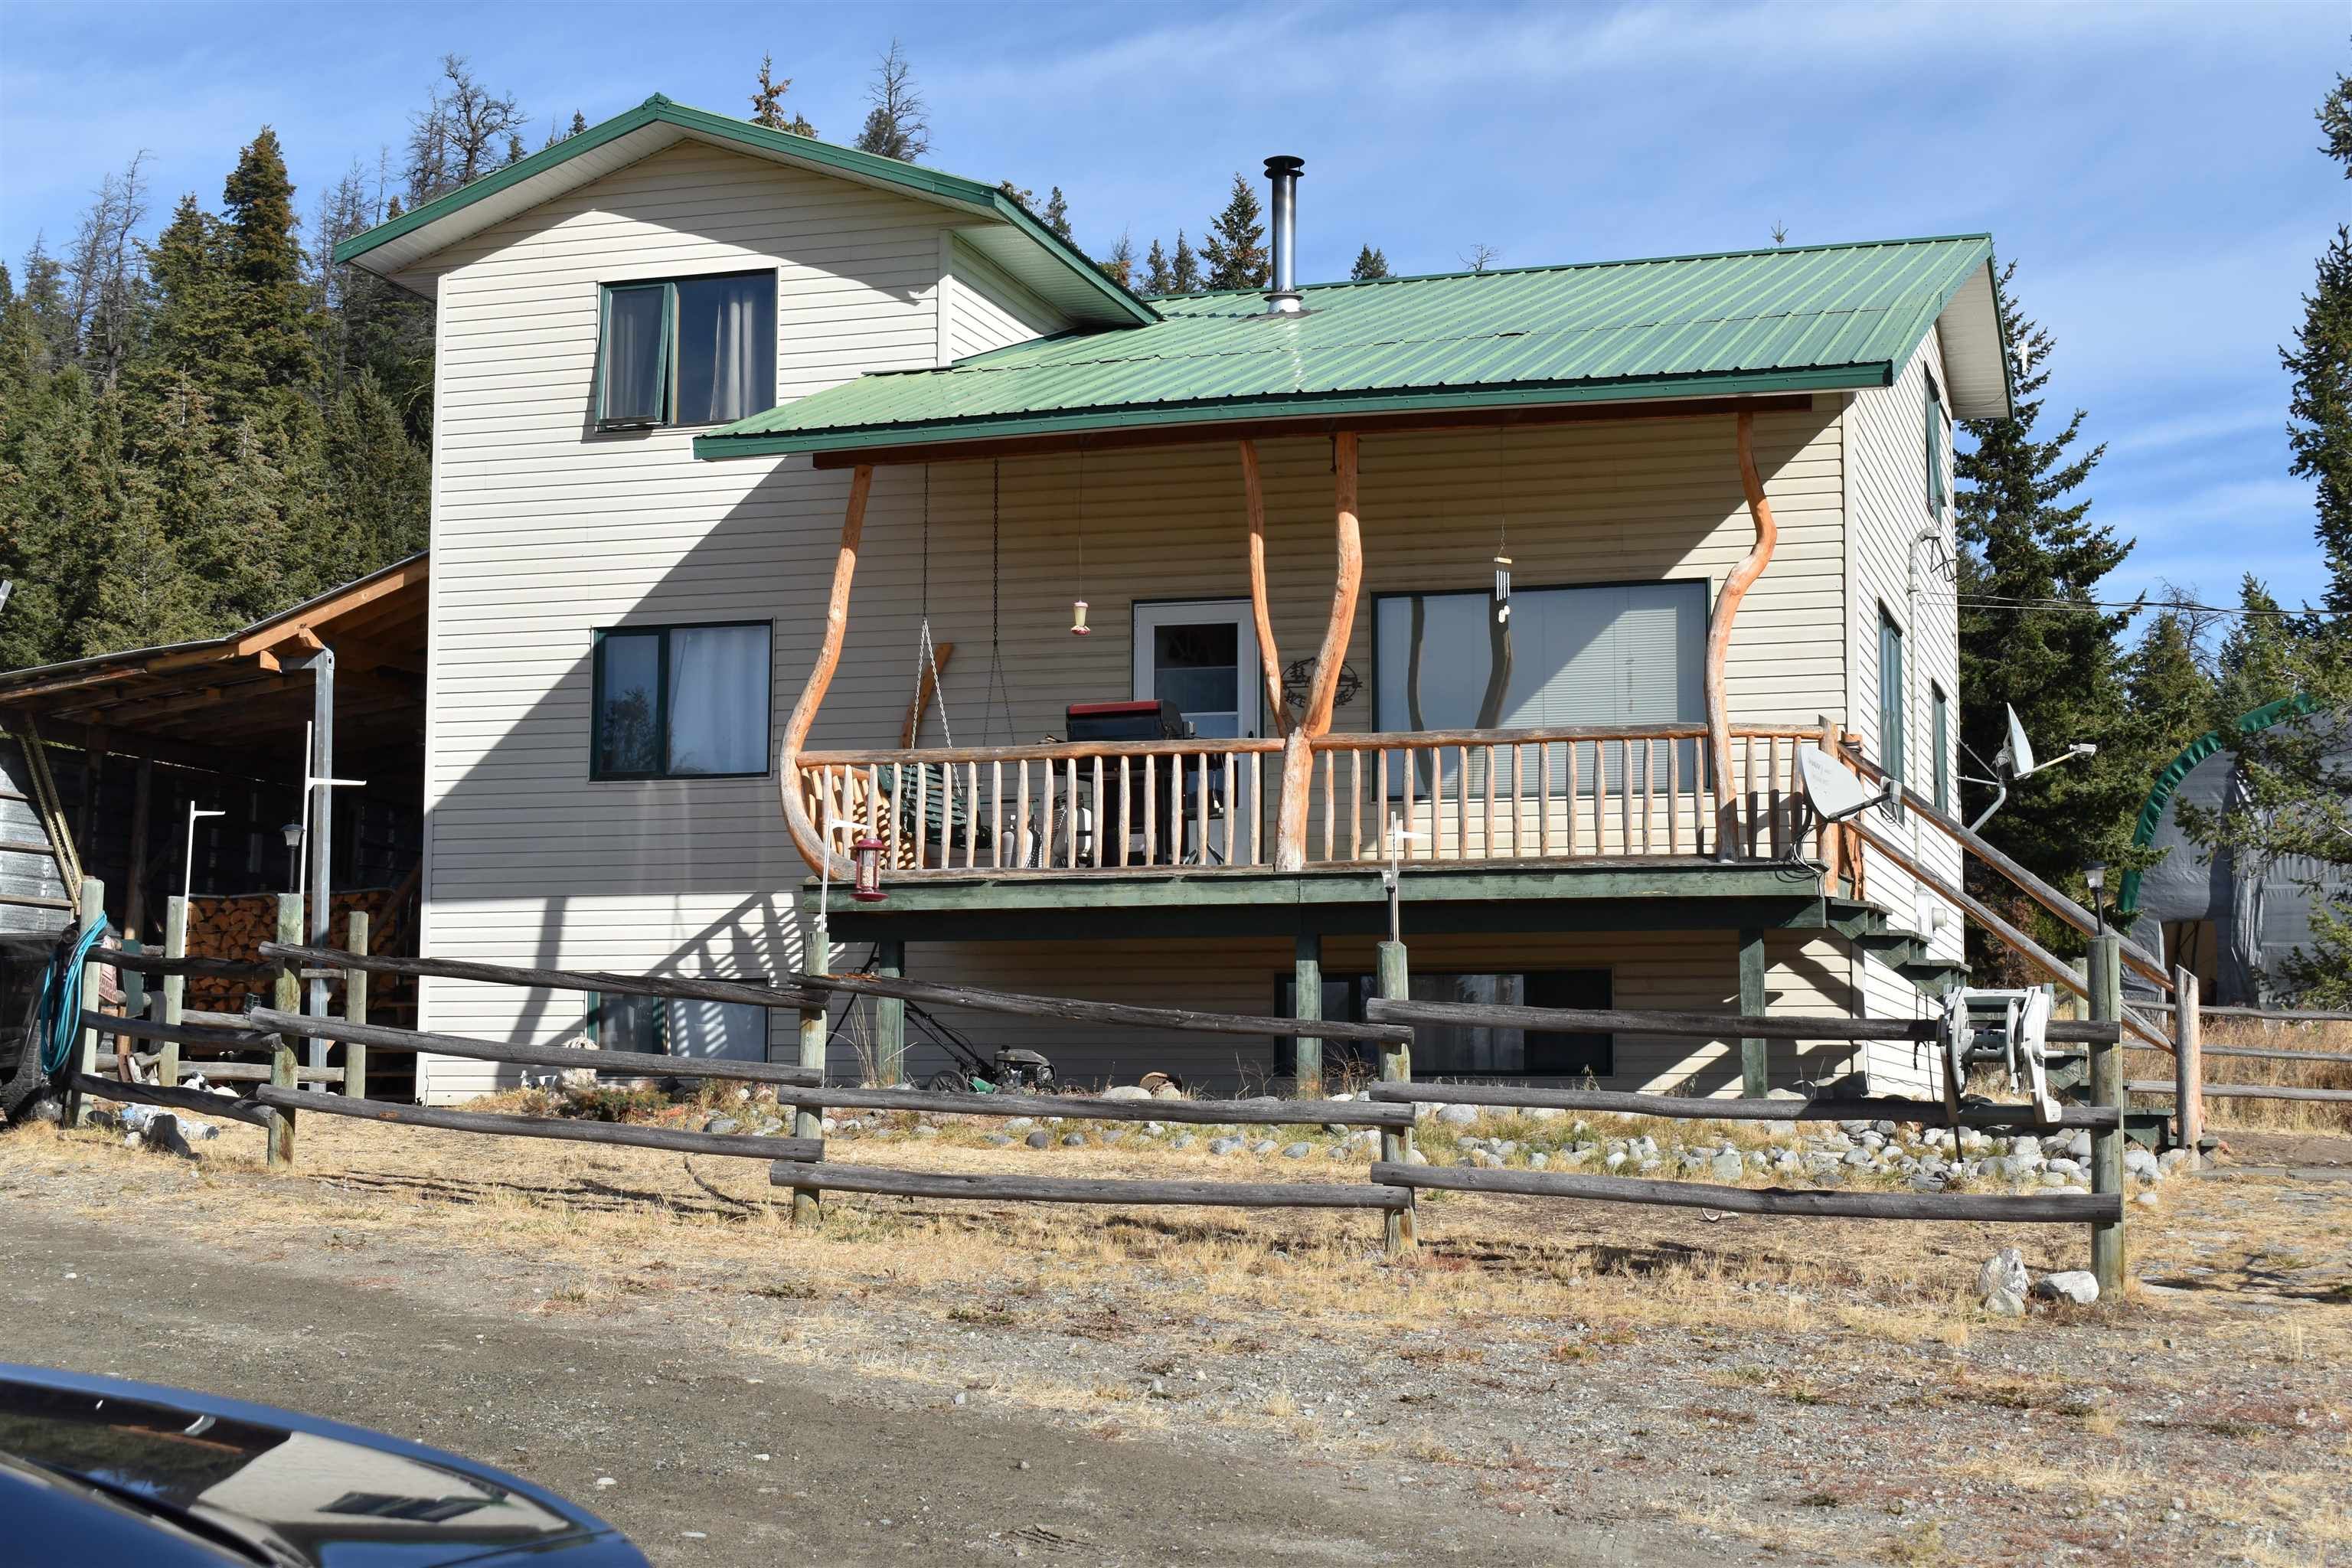 I have sold a property at 11410 CHILCOTIN 20 HWY W in Williams Lake
